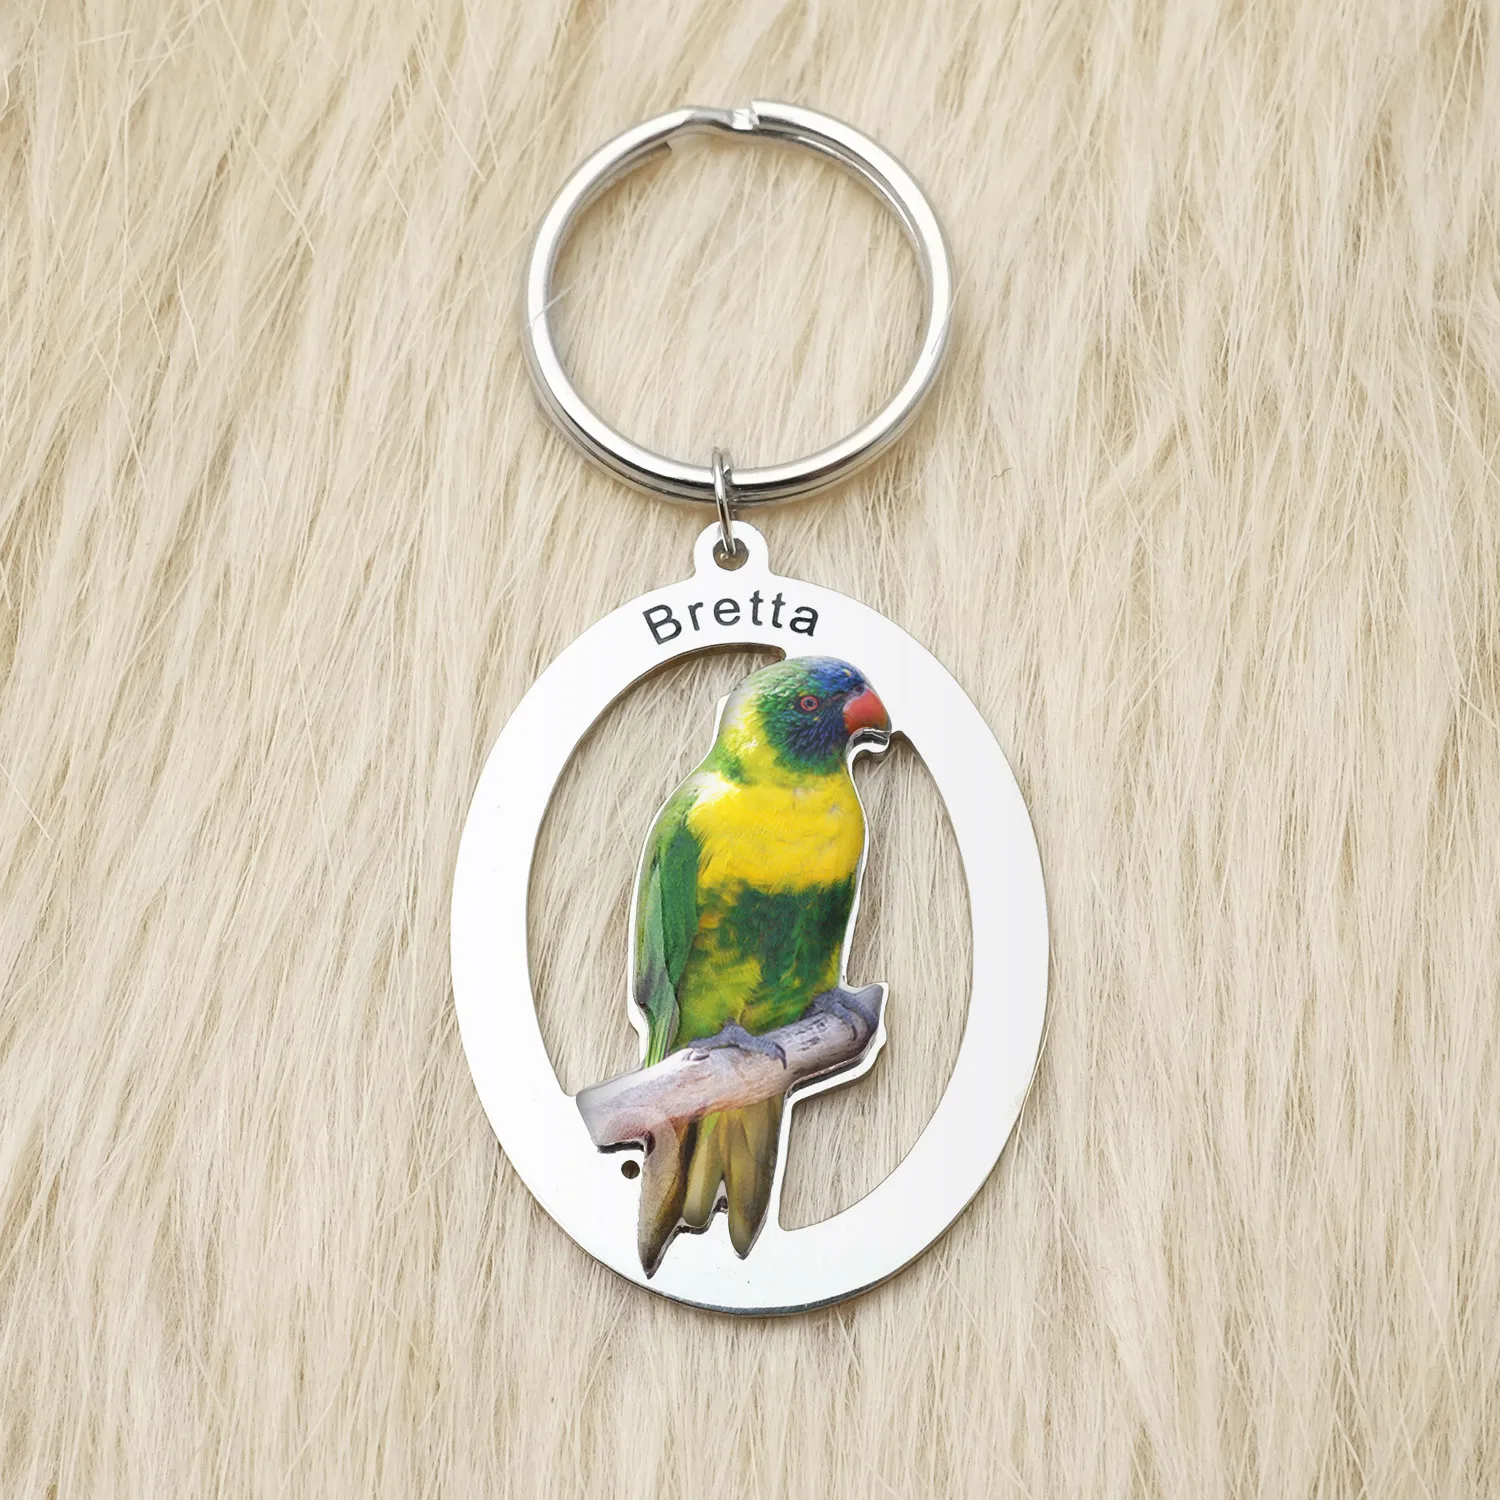 Parrot Bird Key Chains Keychain Cute Animal Key Ring Jewelry Lovebird Parrot Bird Key Chain Photo Gift for Men and Women